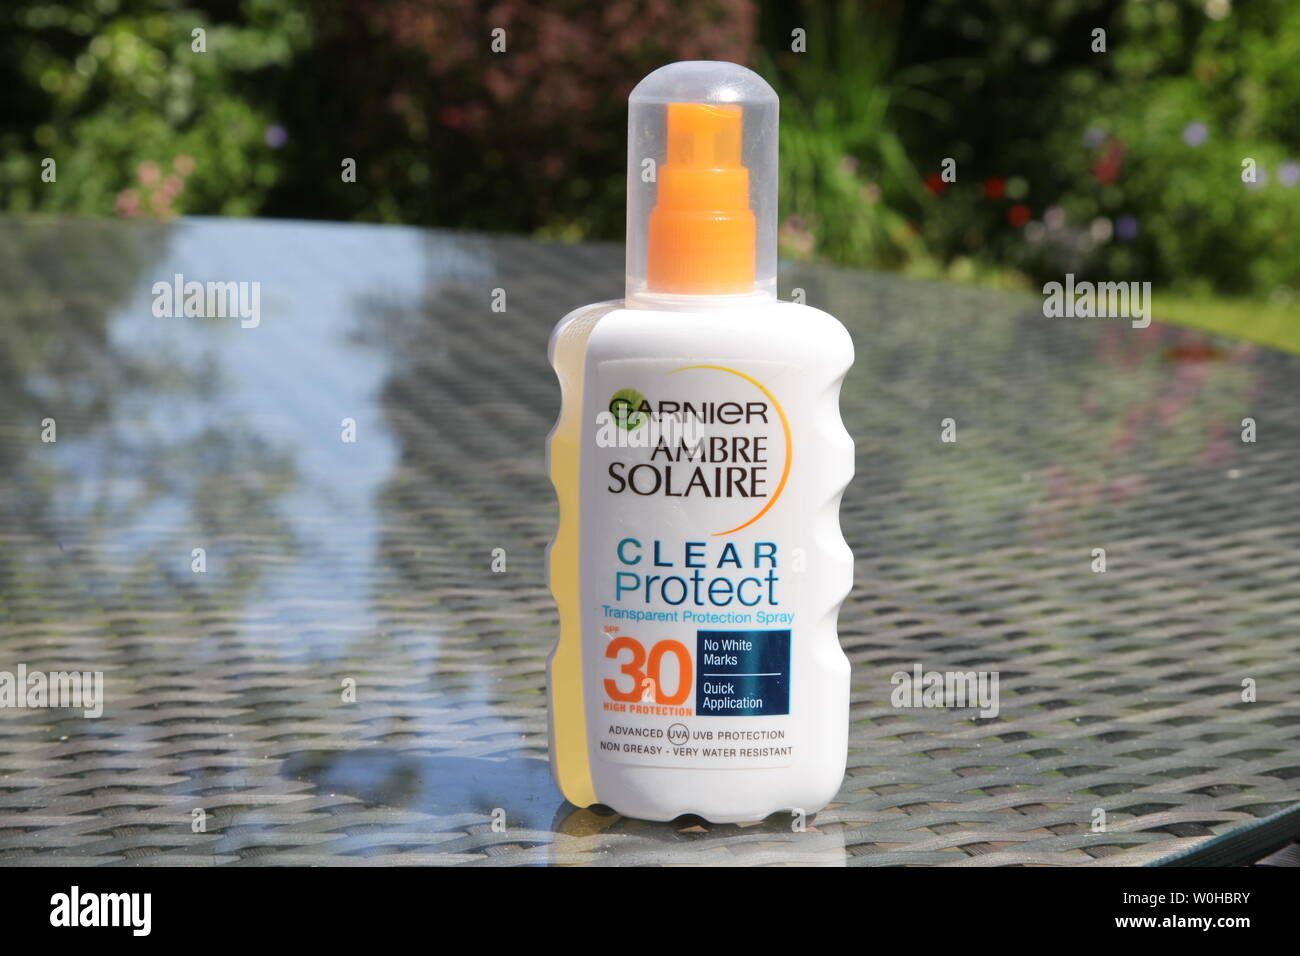 Ambre Solaire High Resolution Stock Photography and Images - Alamy